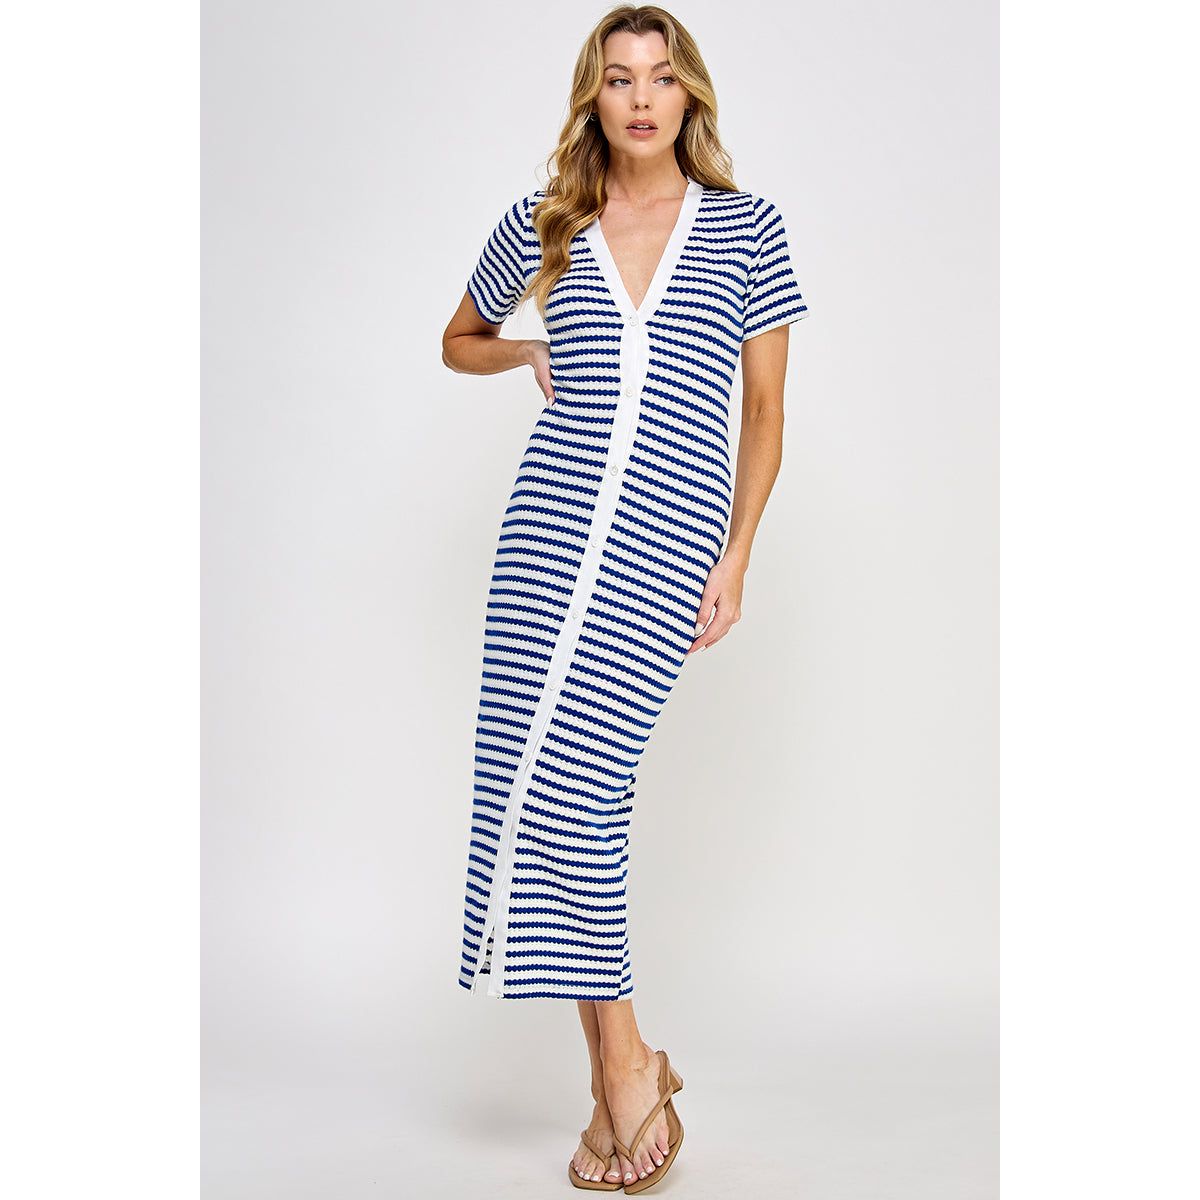 V-Neck Button Down Knit Blue Dress available in sizes Small through Large. Brand: Ellison Apparel. 57% Polyester, 27% Acrylic , 11% Rayon, 5% Nylon.